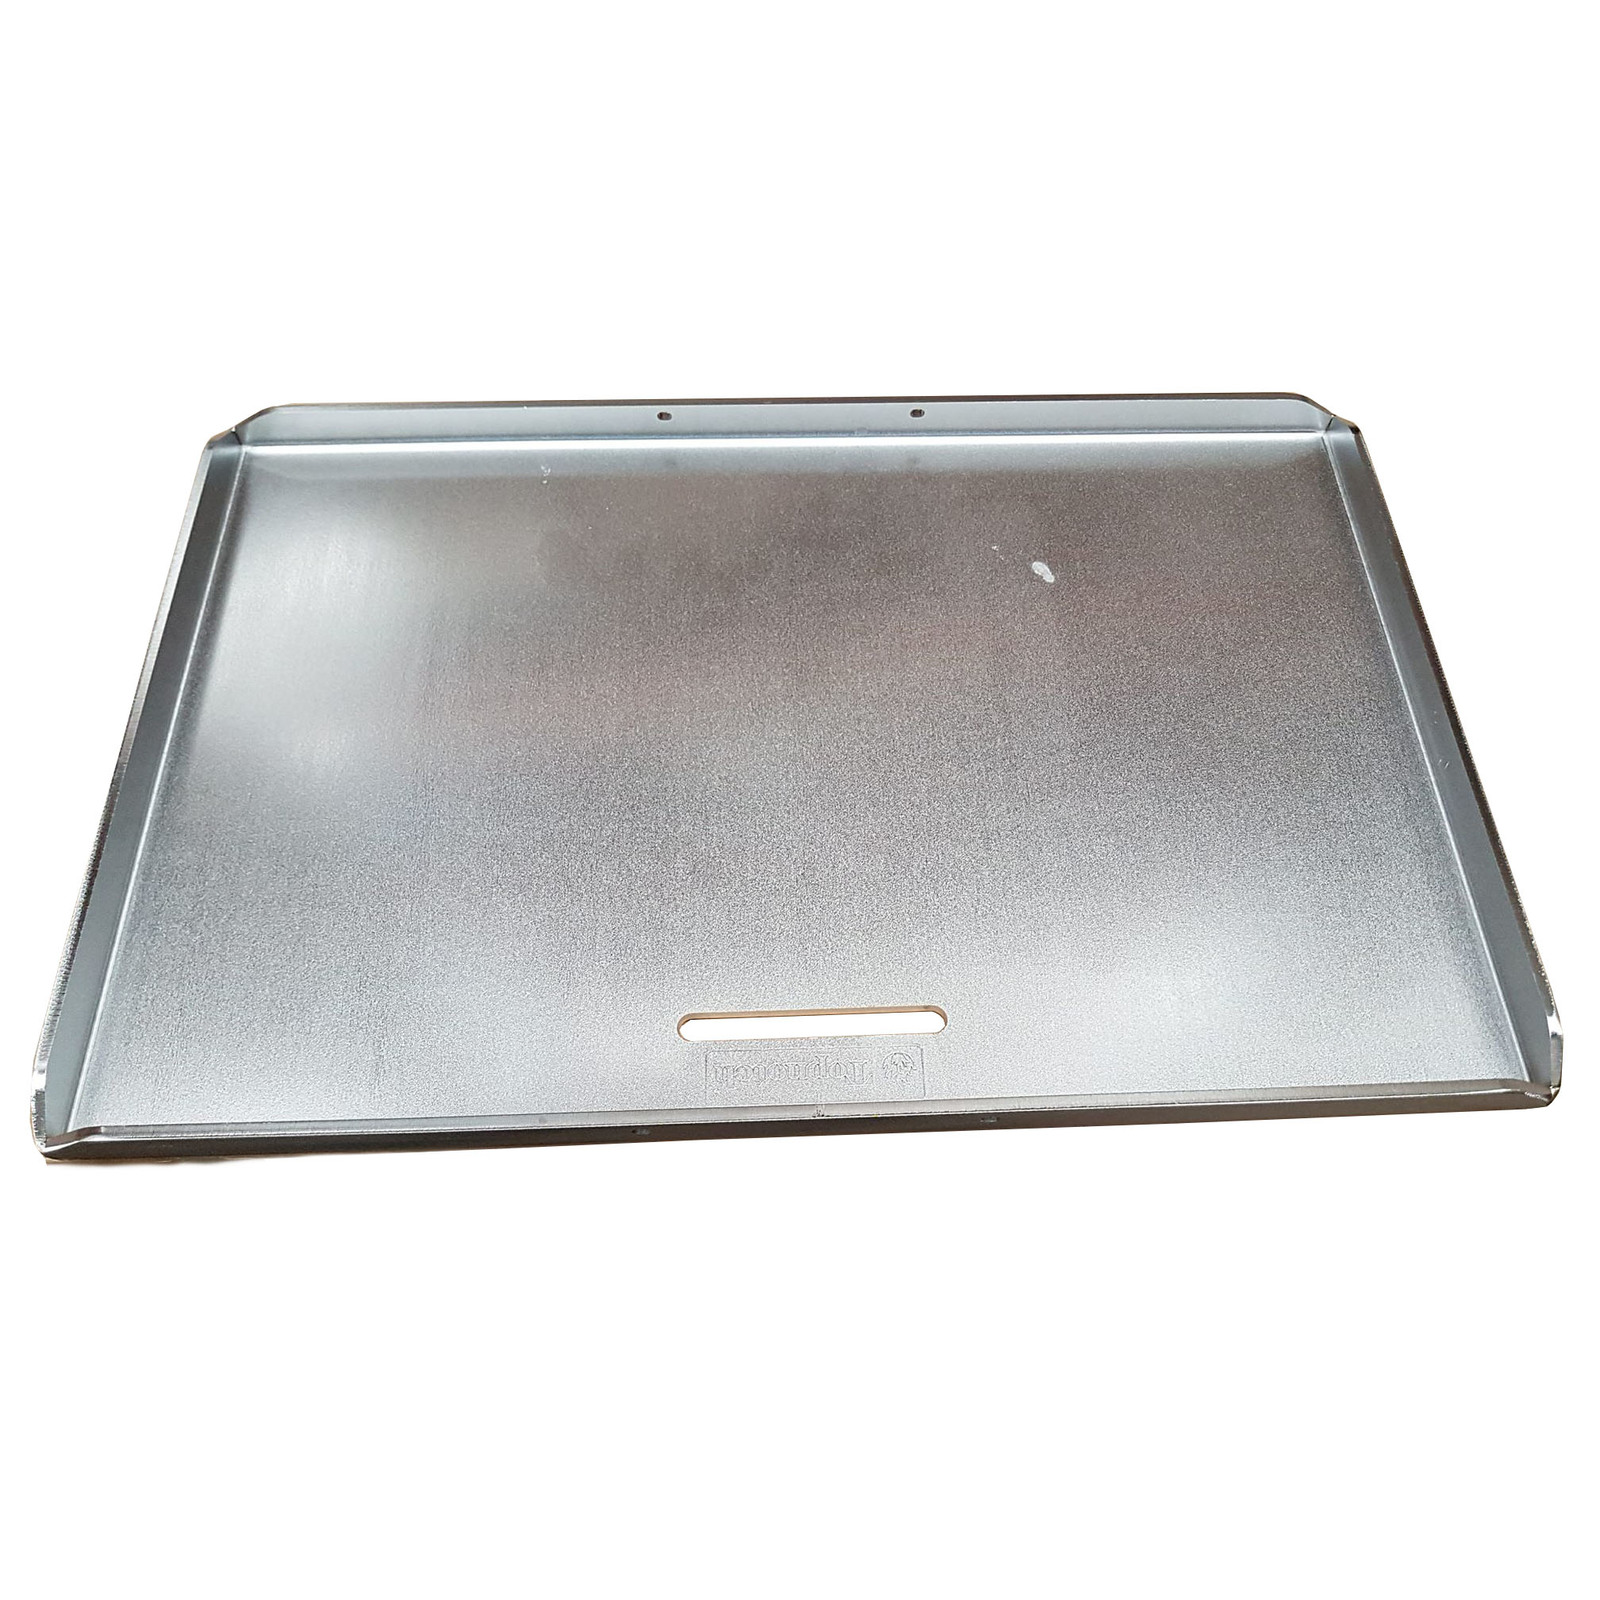 Top Notch Stainless Steel Hot Plate 480x485mm - PSS480X485